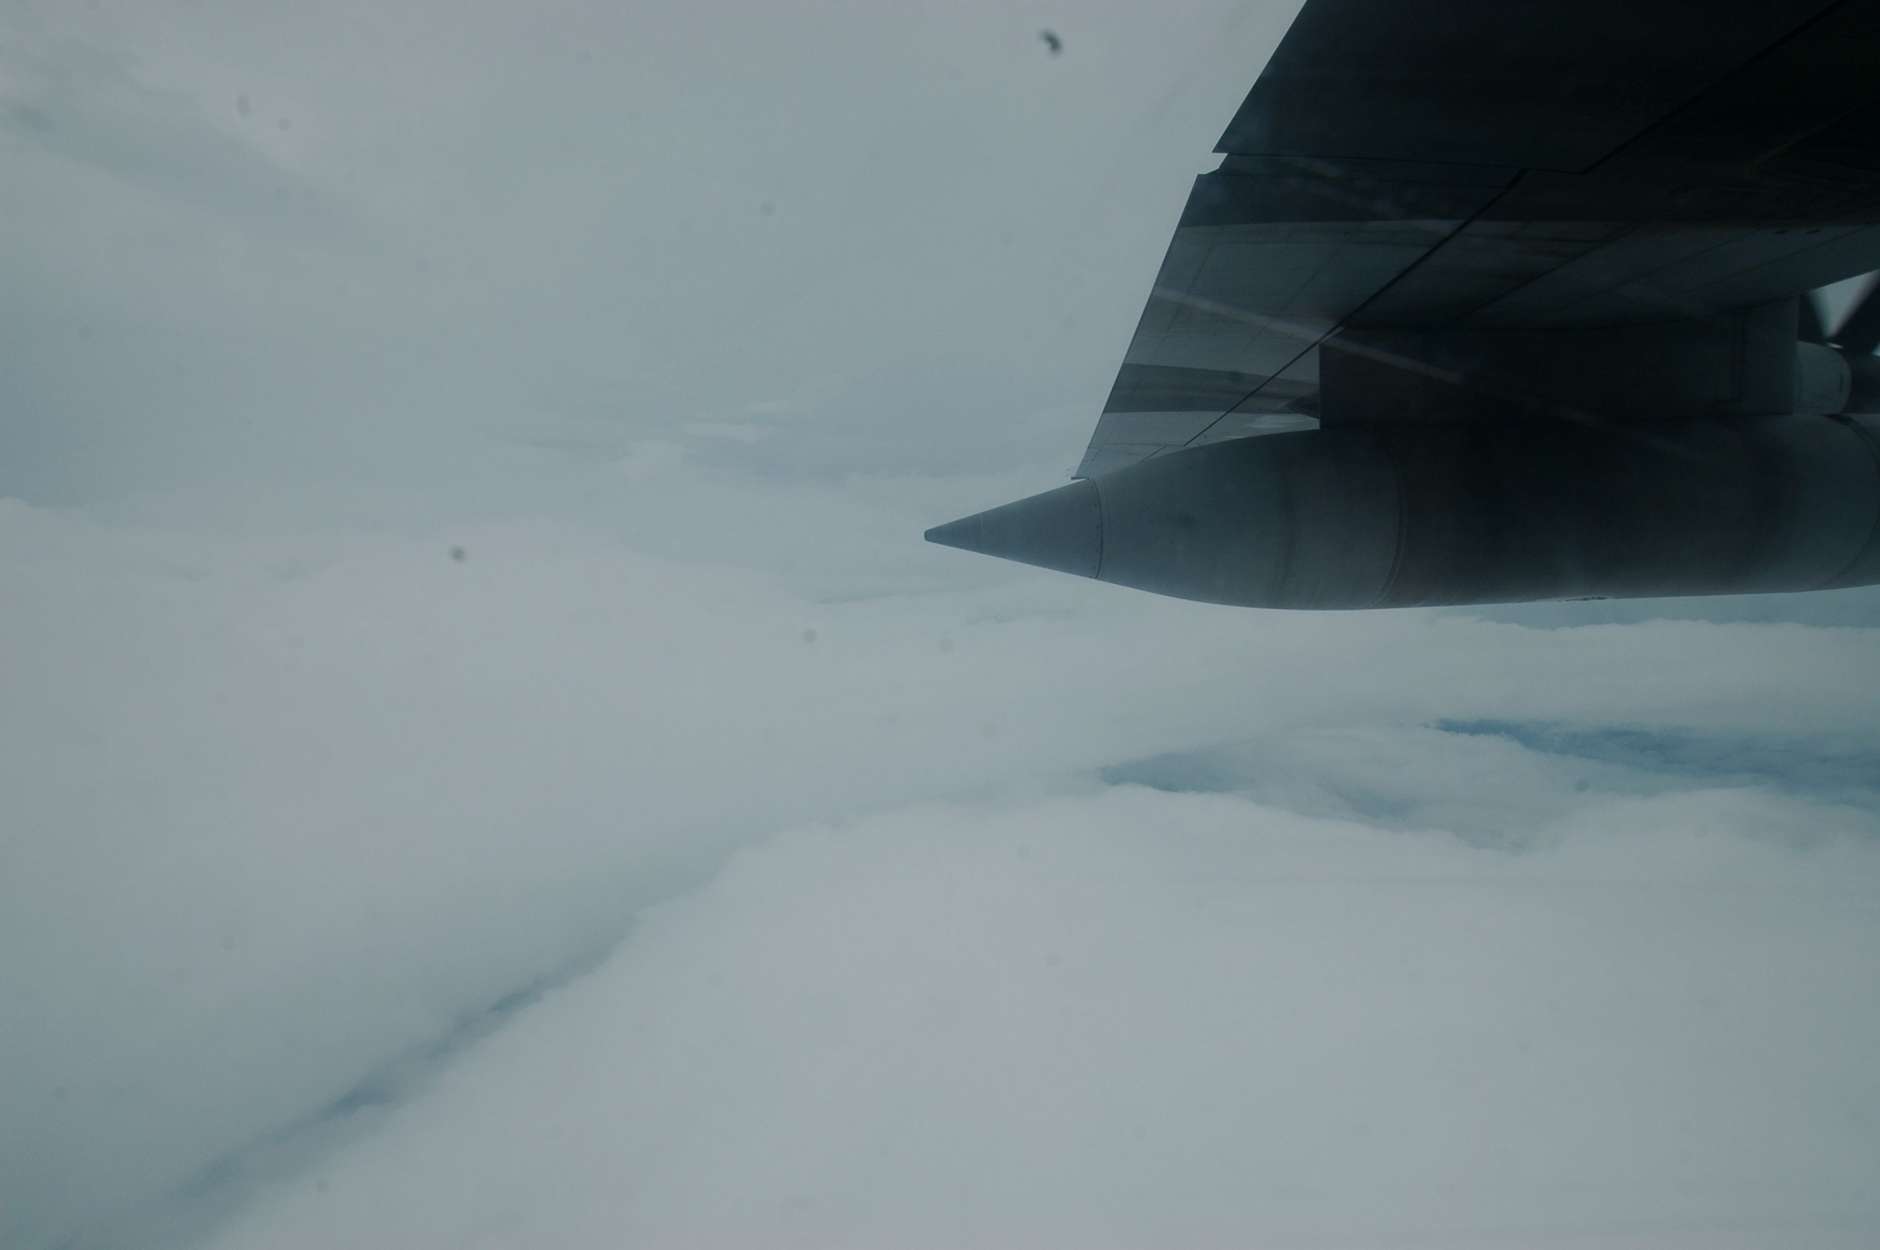 The Hurricane Hunters penetrate the eyewall of major Hurricane Irene as it curves toward the Eastern Seaboard in late August 2011. (WTOP/Dave Dildine)